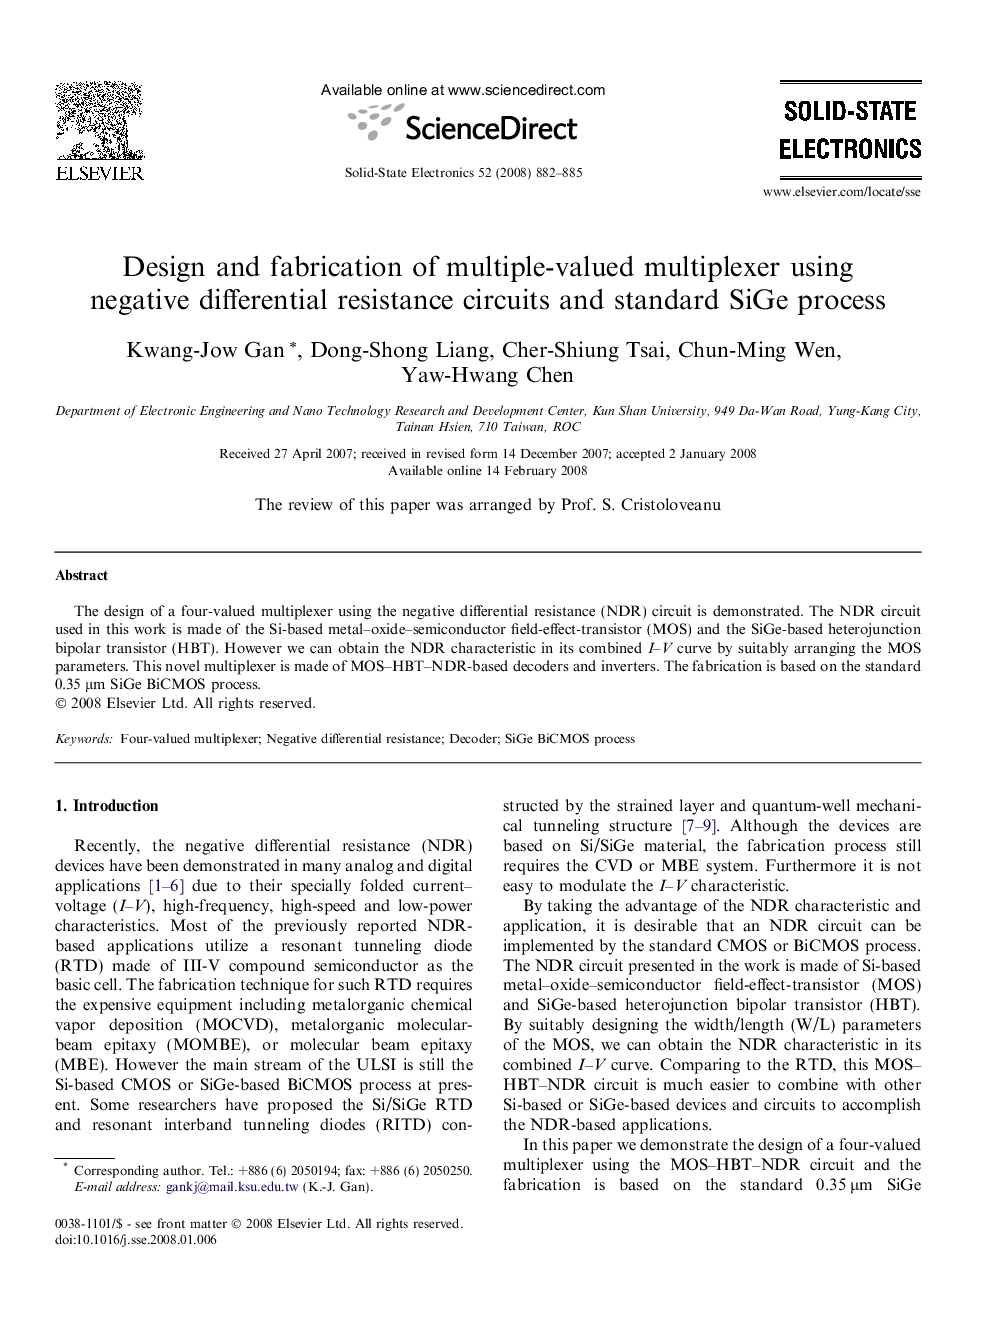 Design and fabrication of multiple-valued multiplexer using negative differential resistance circuits and standard SiGe process